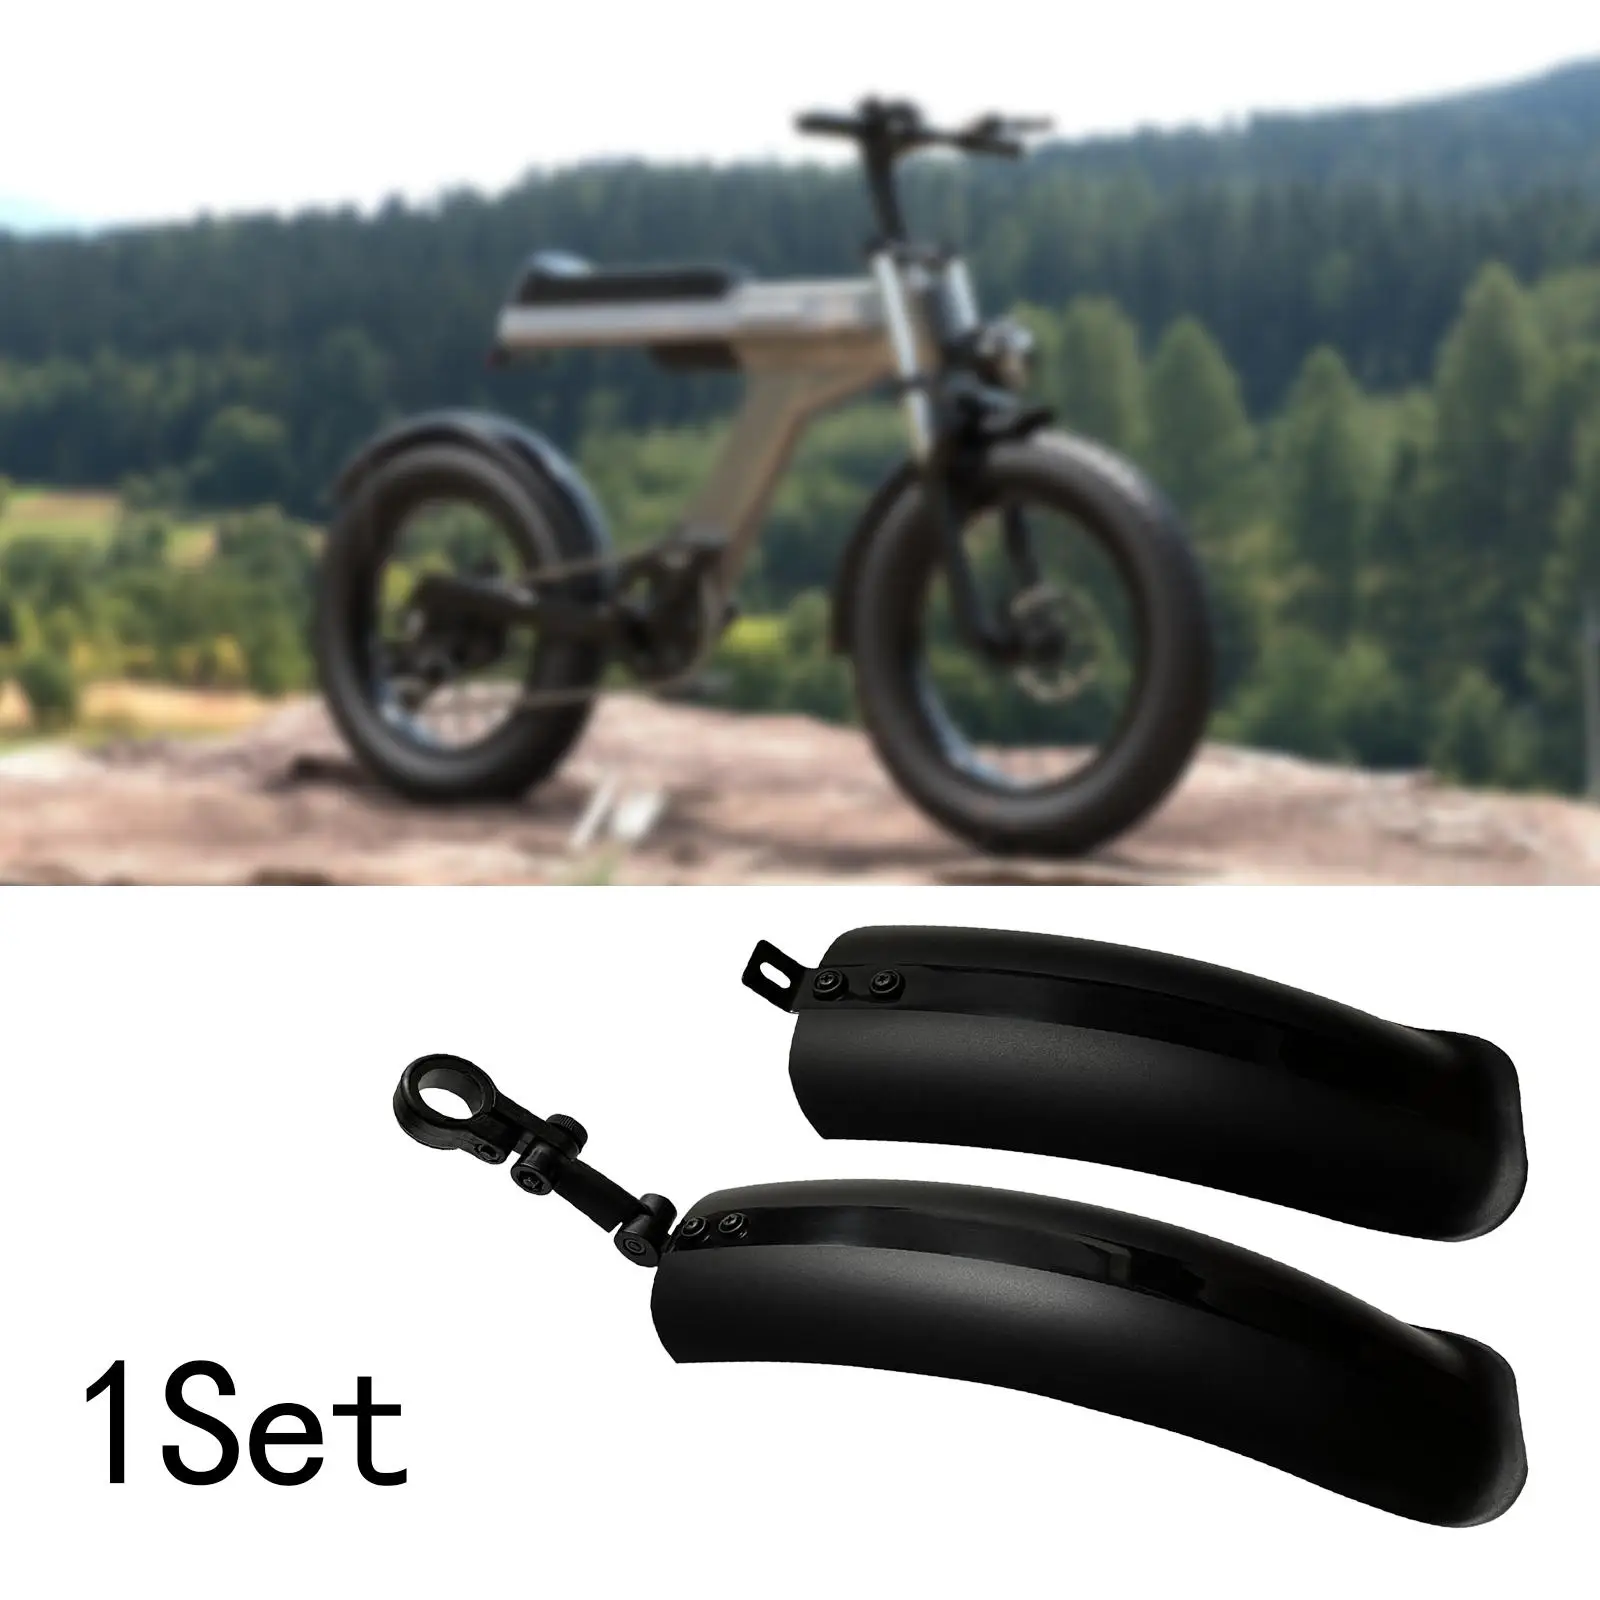 Bike Mudguard Front Rear Set Repair Easy to Install Supplies Mud Guard for